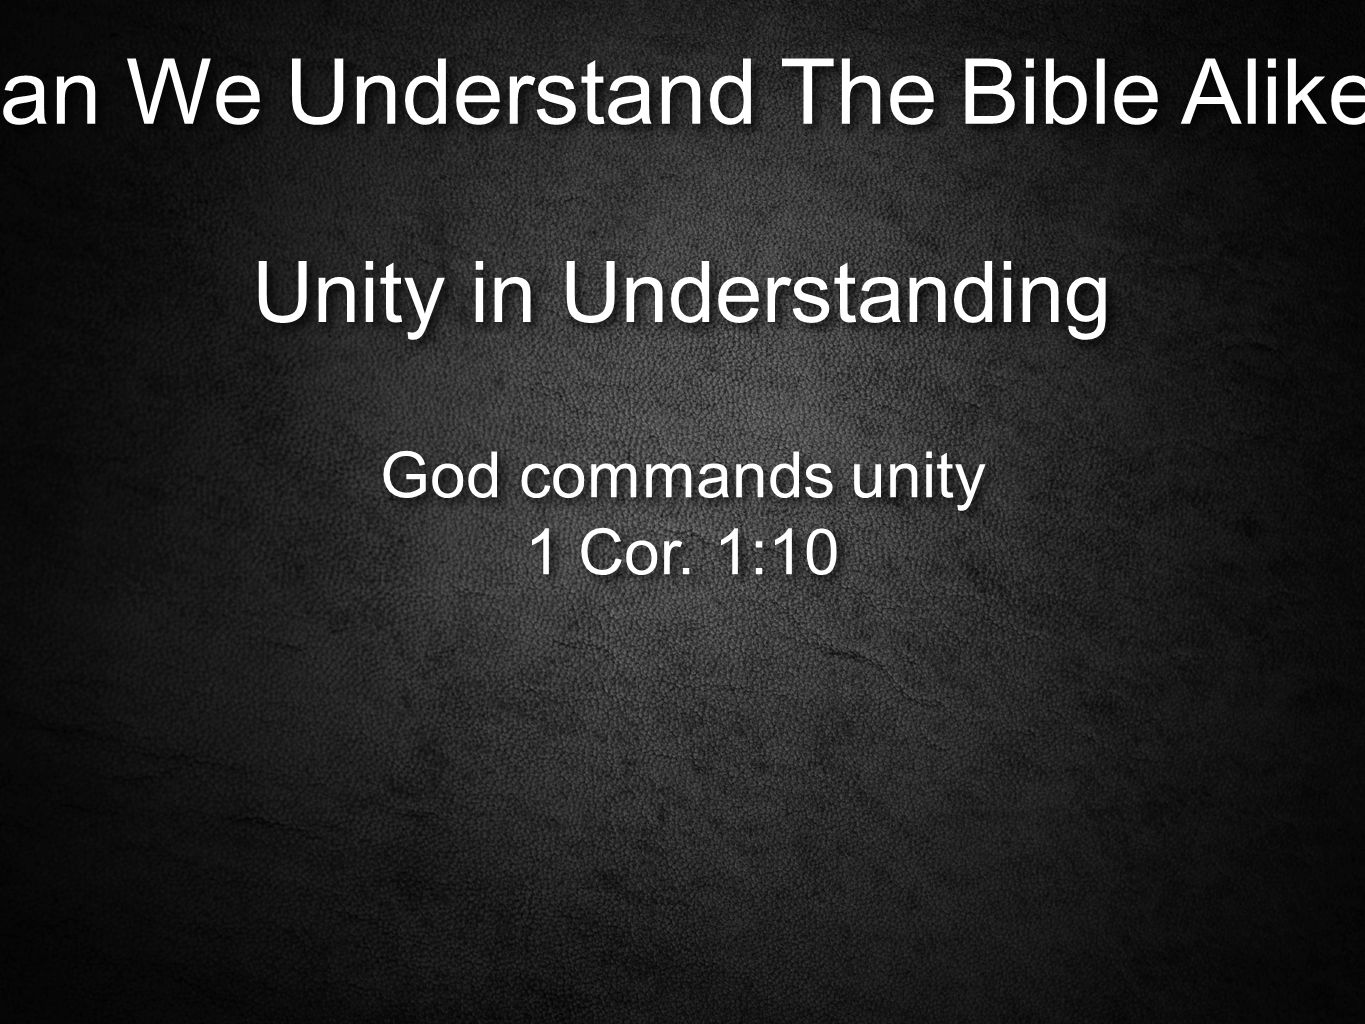 Can We Understand The Bible Alike. Unity in Understanding God commands unity 1 Cor.